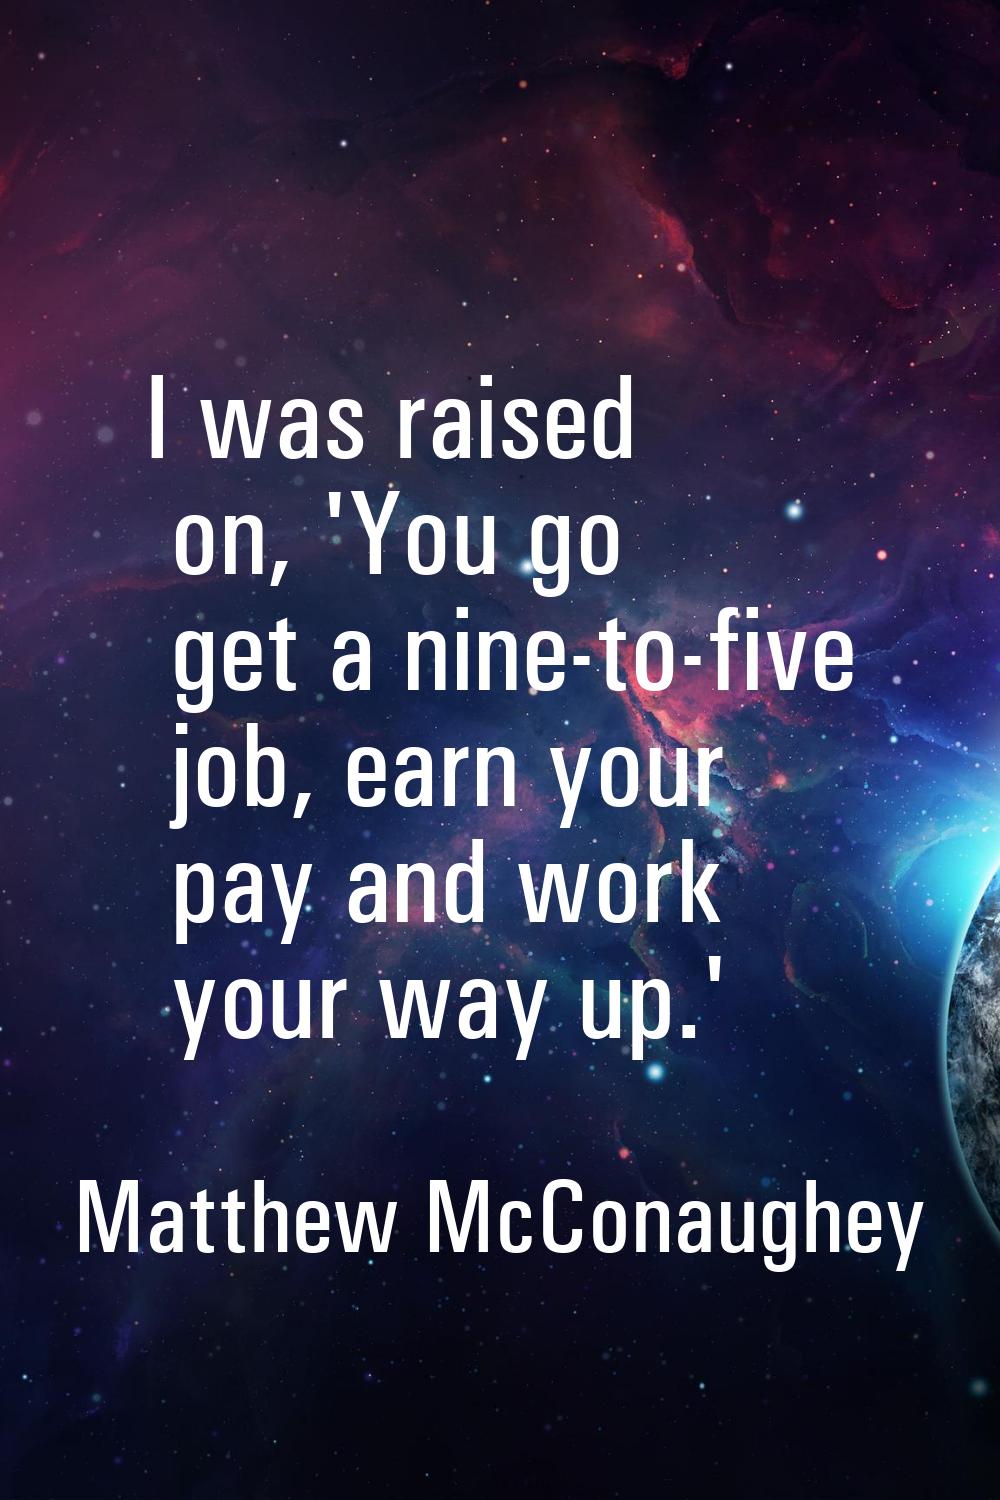 I was raised on, 'You go get a nine-to-five job, earn your pay and work your way up.'